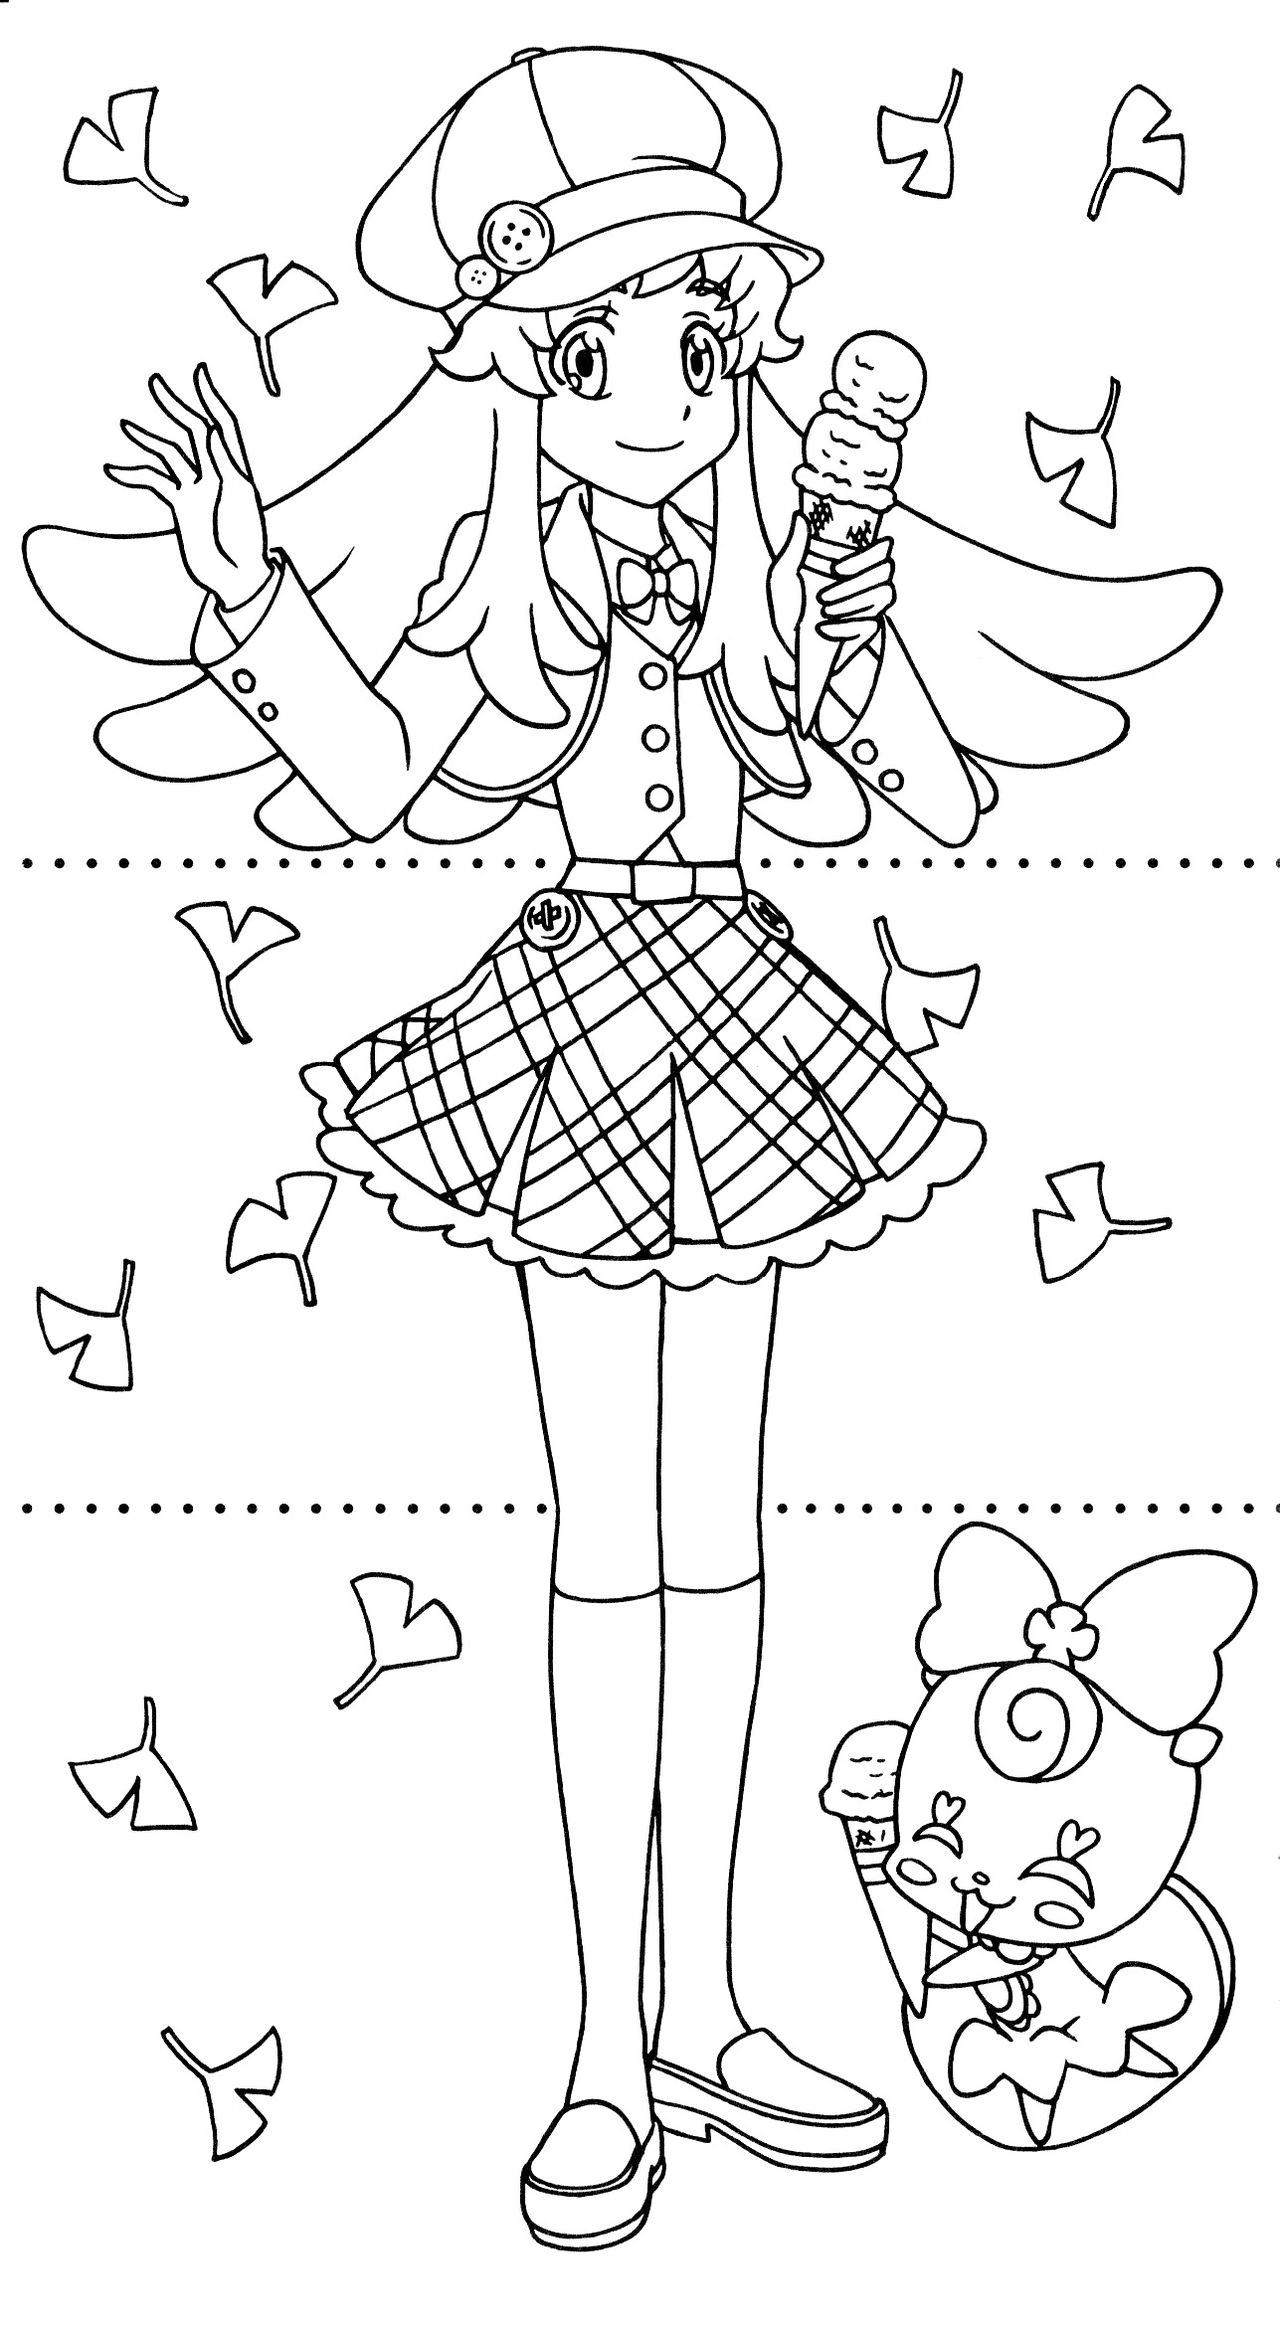 Happiness Charge Precure Dressup Coloring Book 30